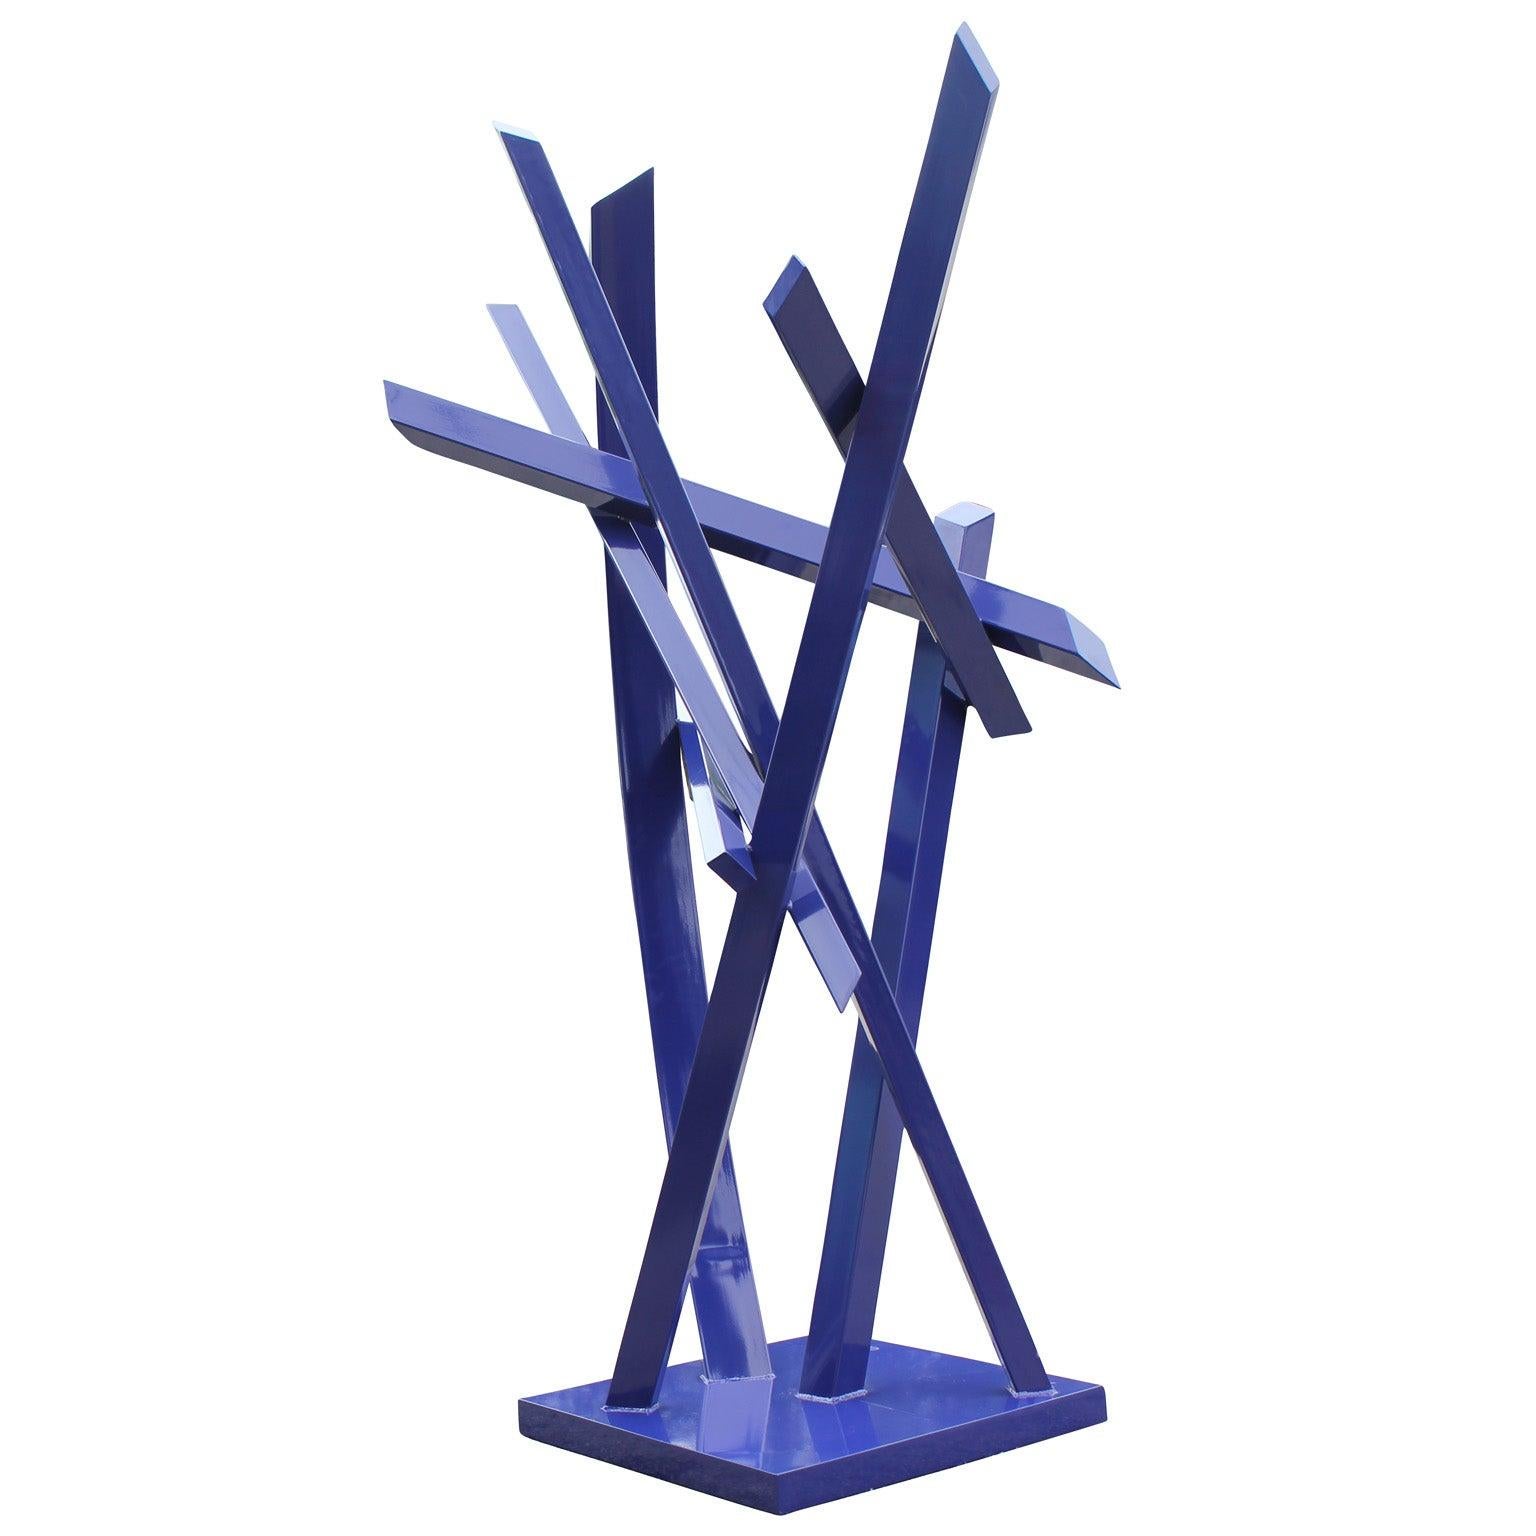 Huge 12ft tall cobalt blue powder coated steel abstract sculpture. The sculpture is stunning in person and looks incredible from all angles. The piece has been industrially powder coated and should last many years in all weather types. It could also